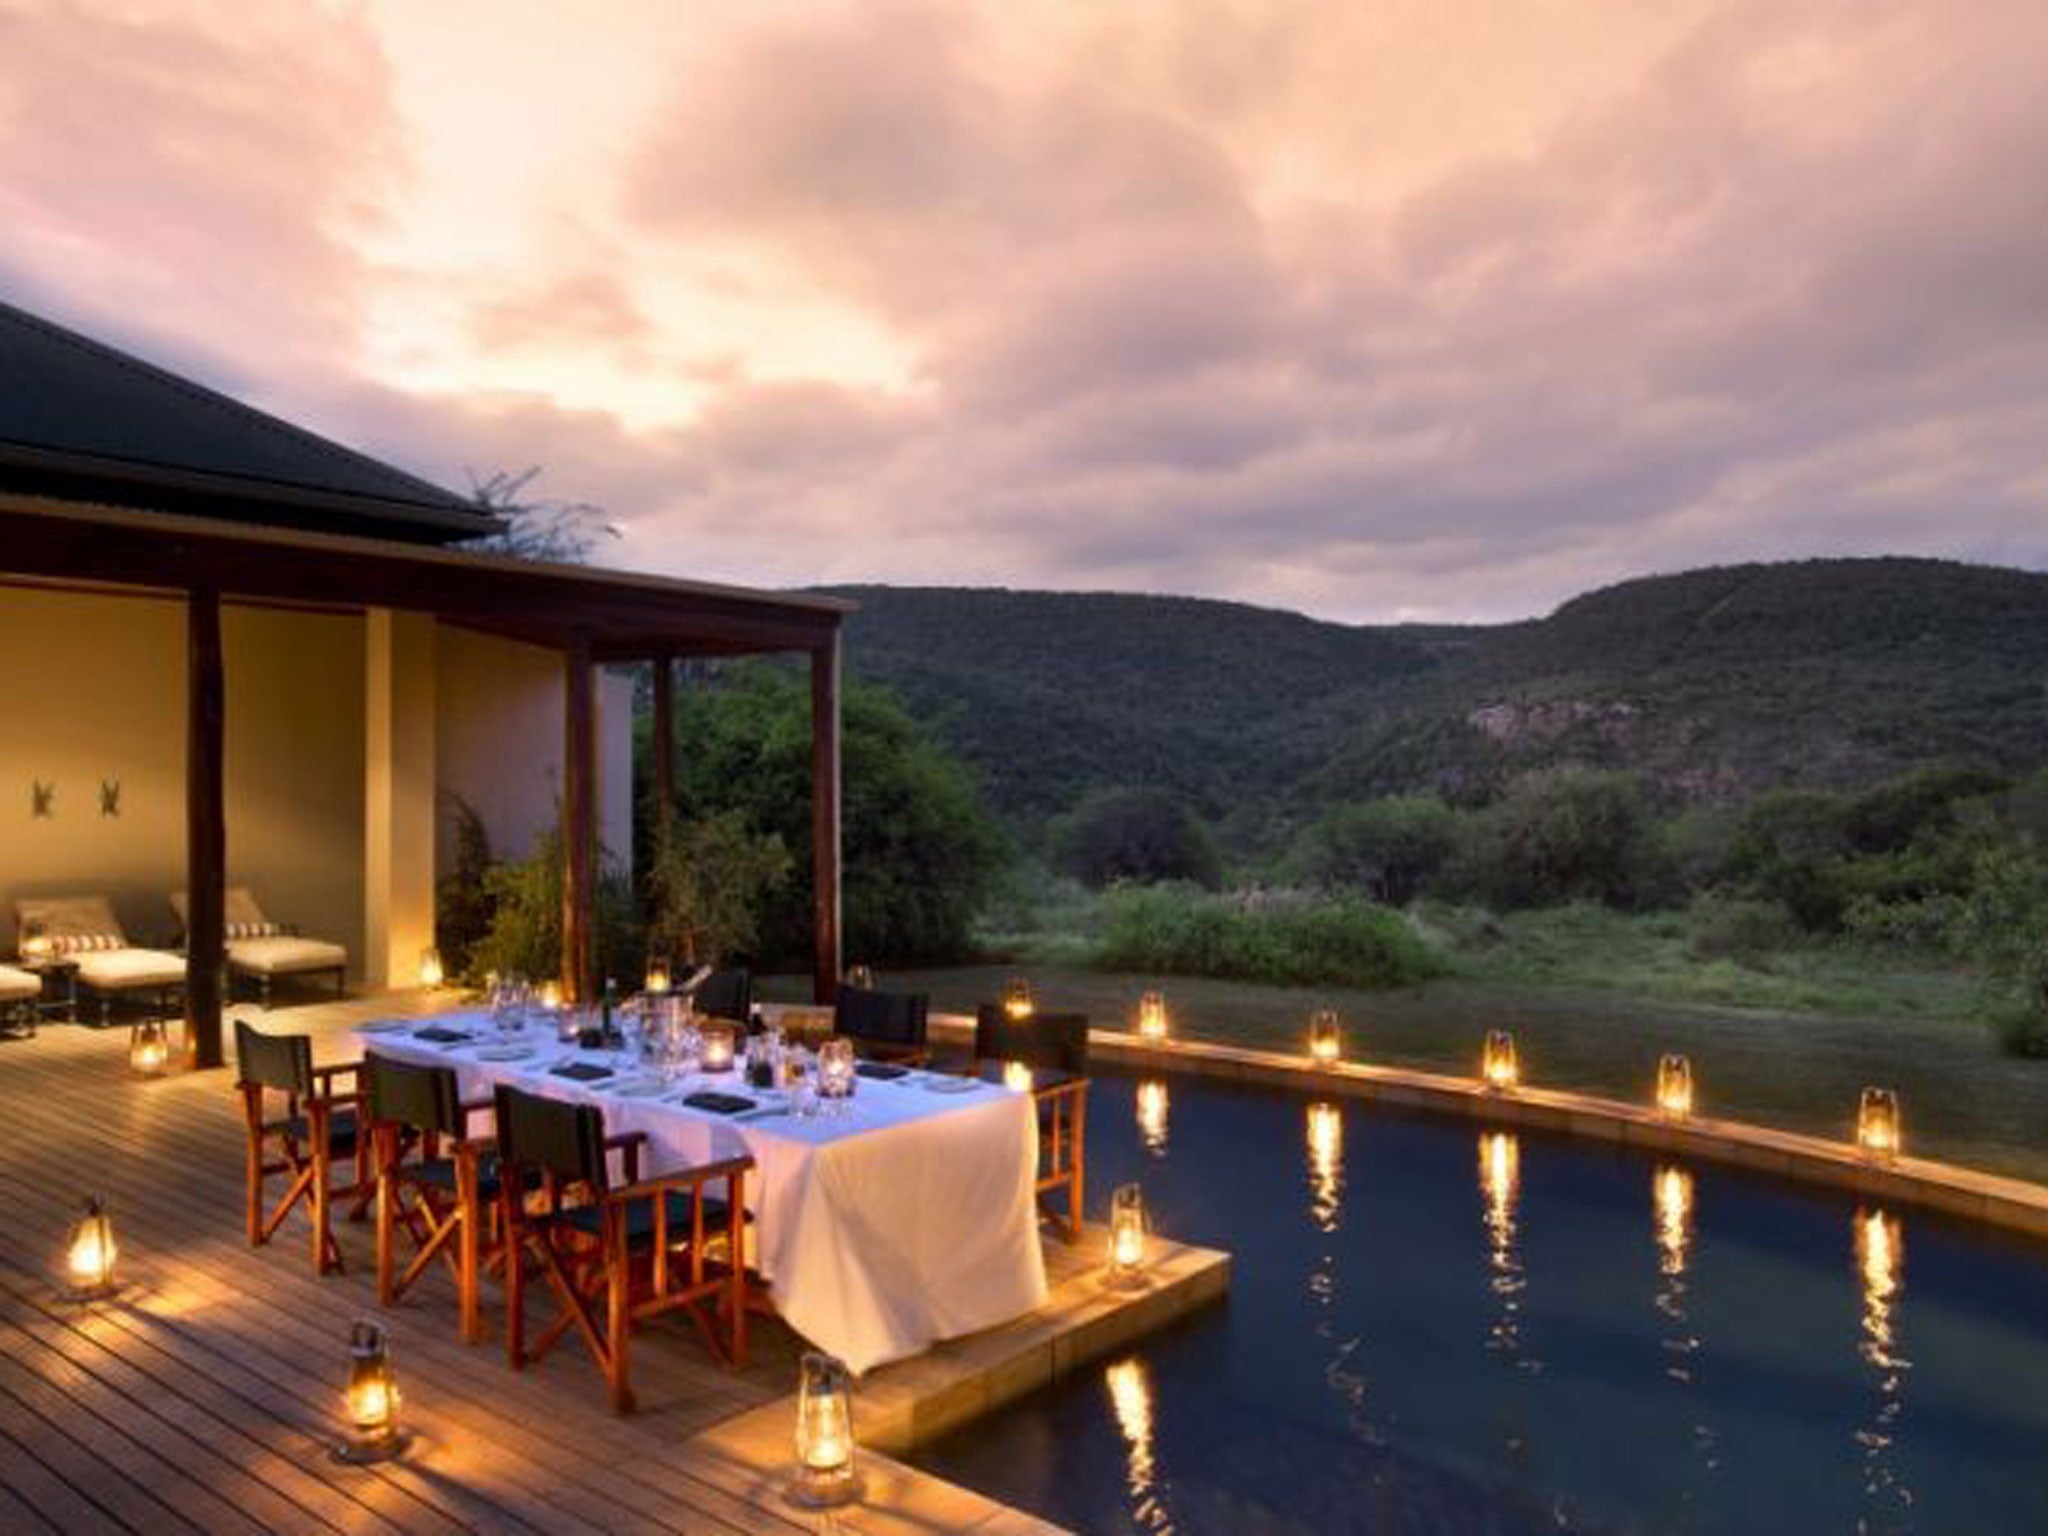 Nature calls: the picturesque Melton Manor in South Africa